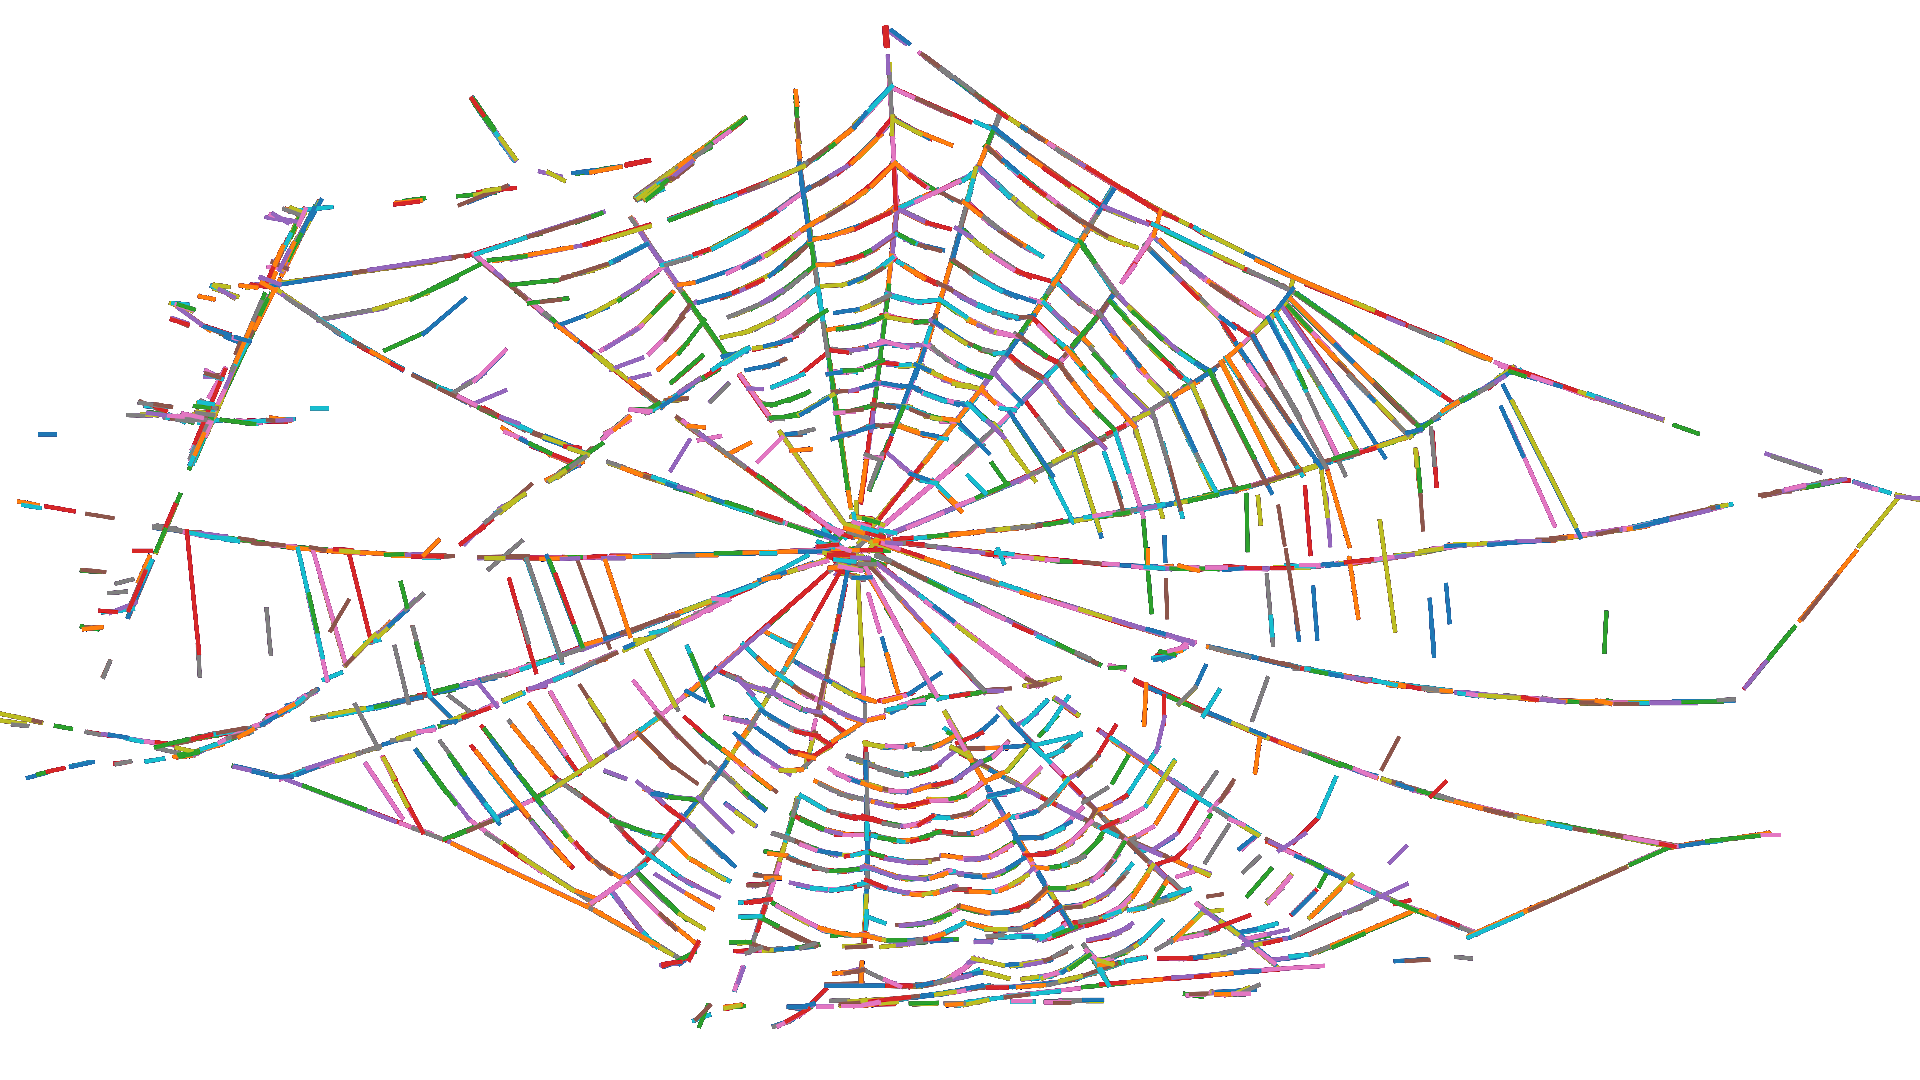 Visualised Hough line transform of a spider web.